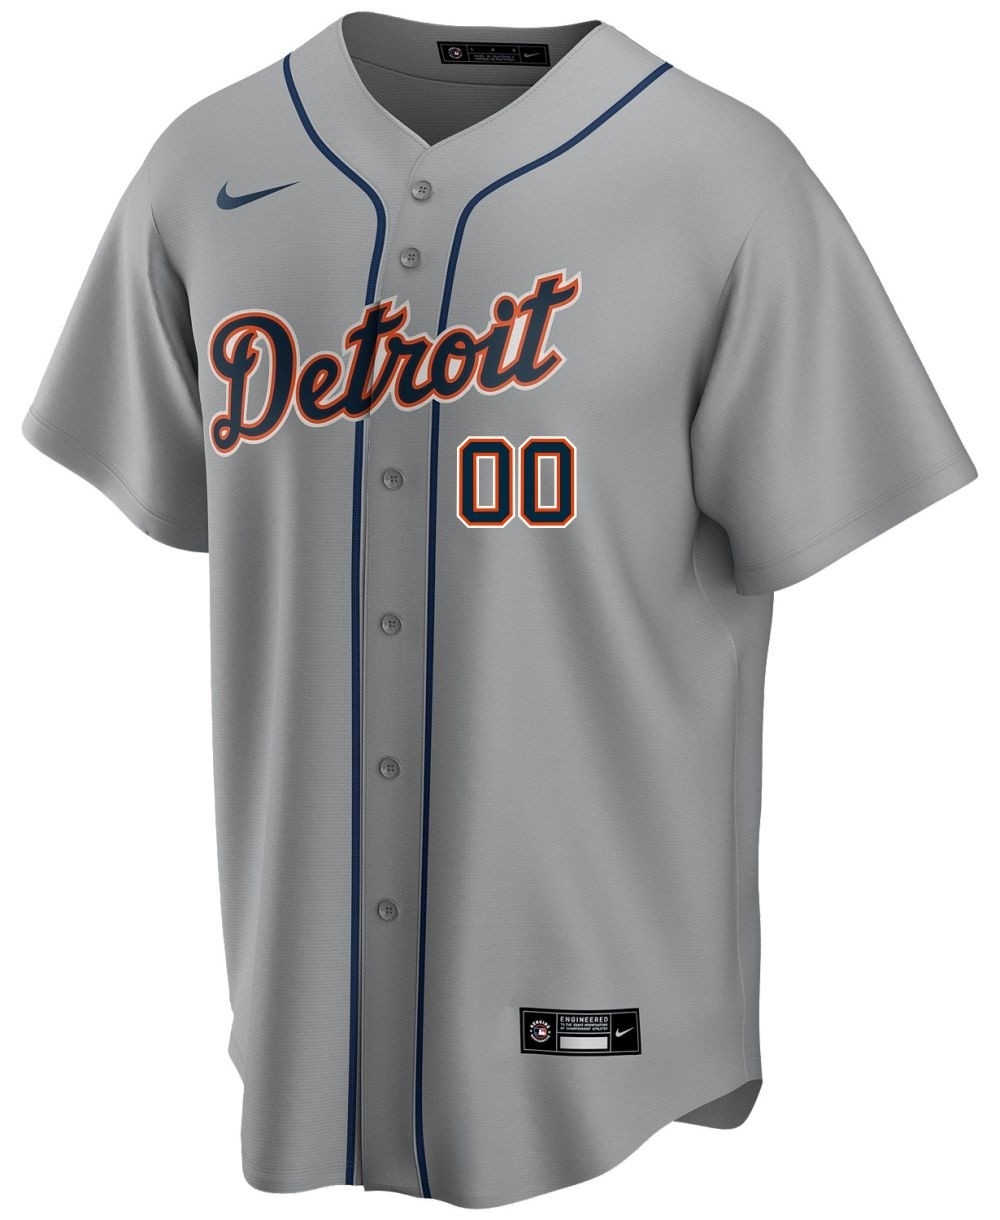 detroit tigers all star jersey